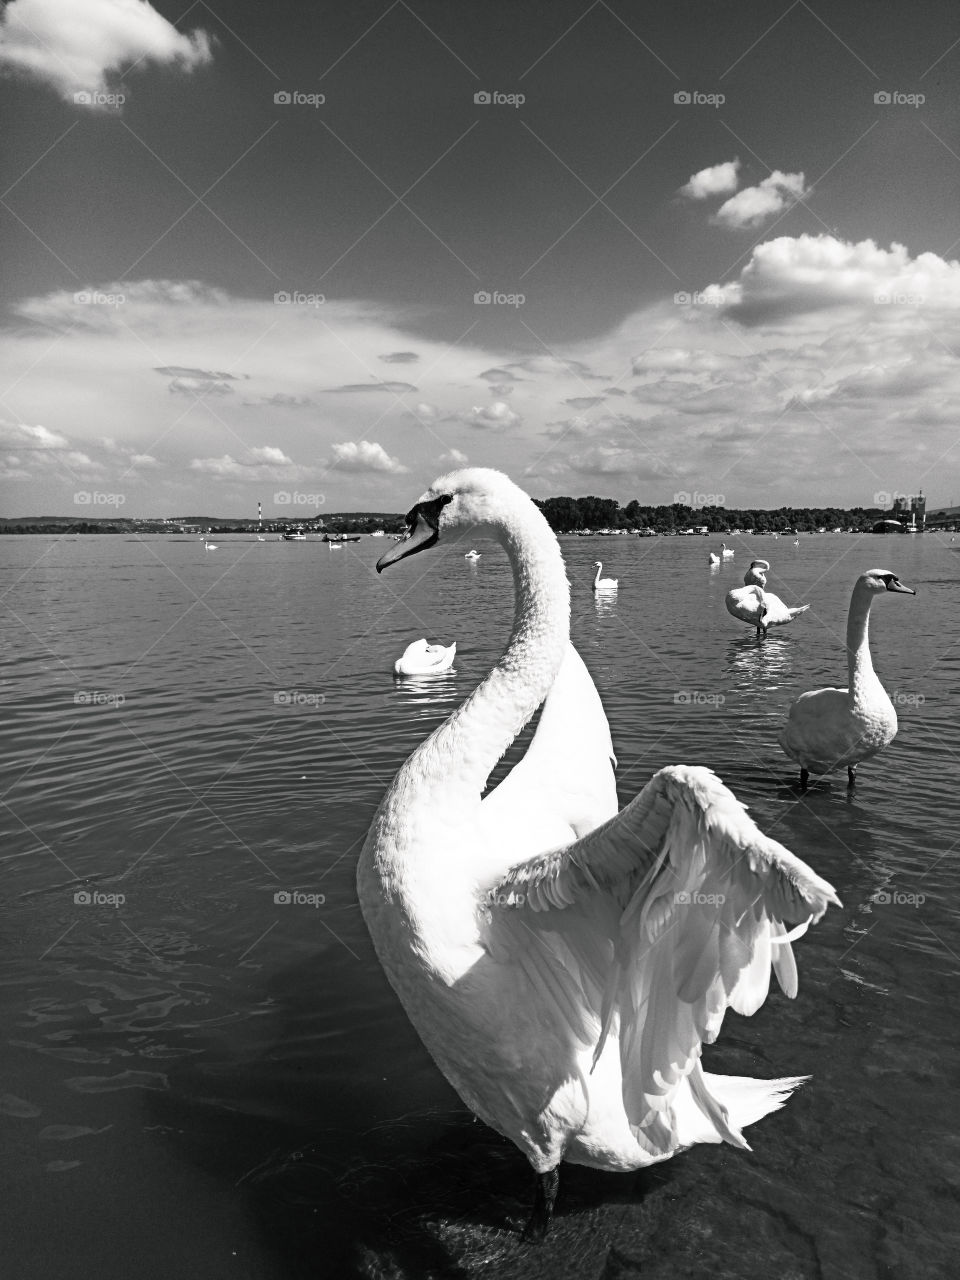 white swan with spread wings on the river with many swans in the background in white and black